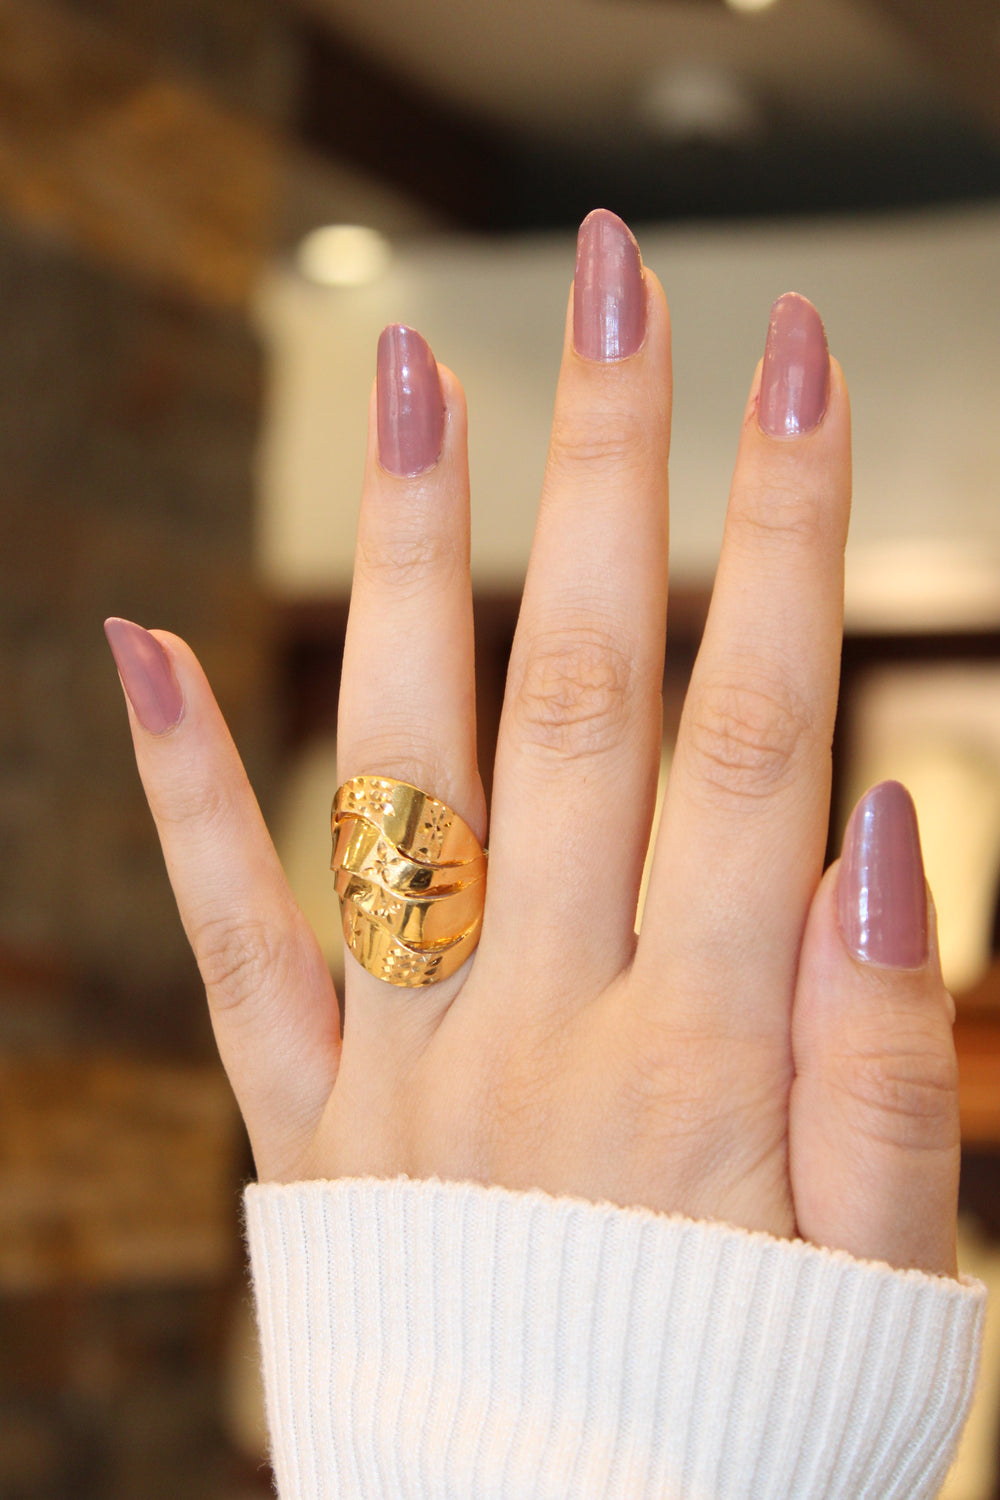 21K Fancy Ring Made of 21K Yellow Gold by Saeed Jewelry-15879